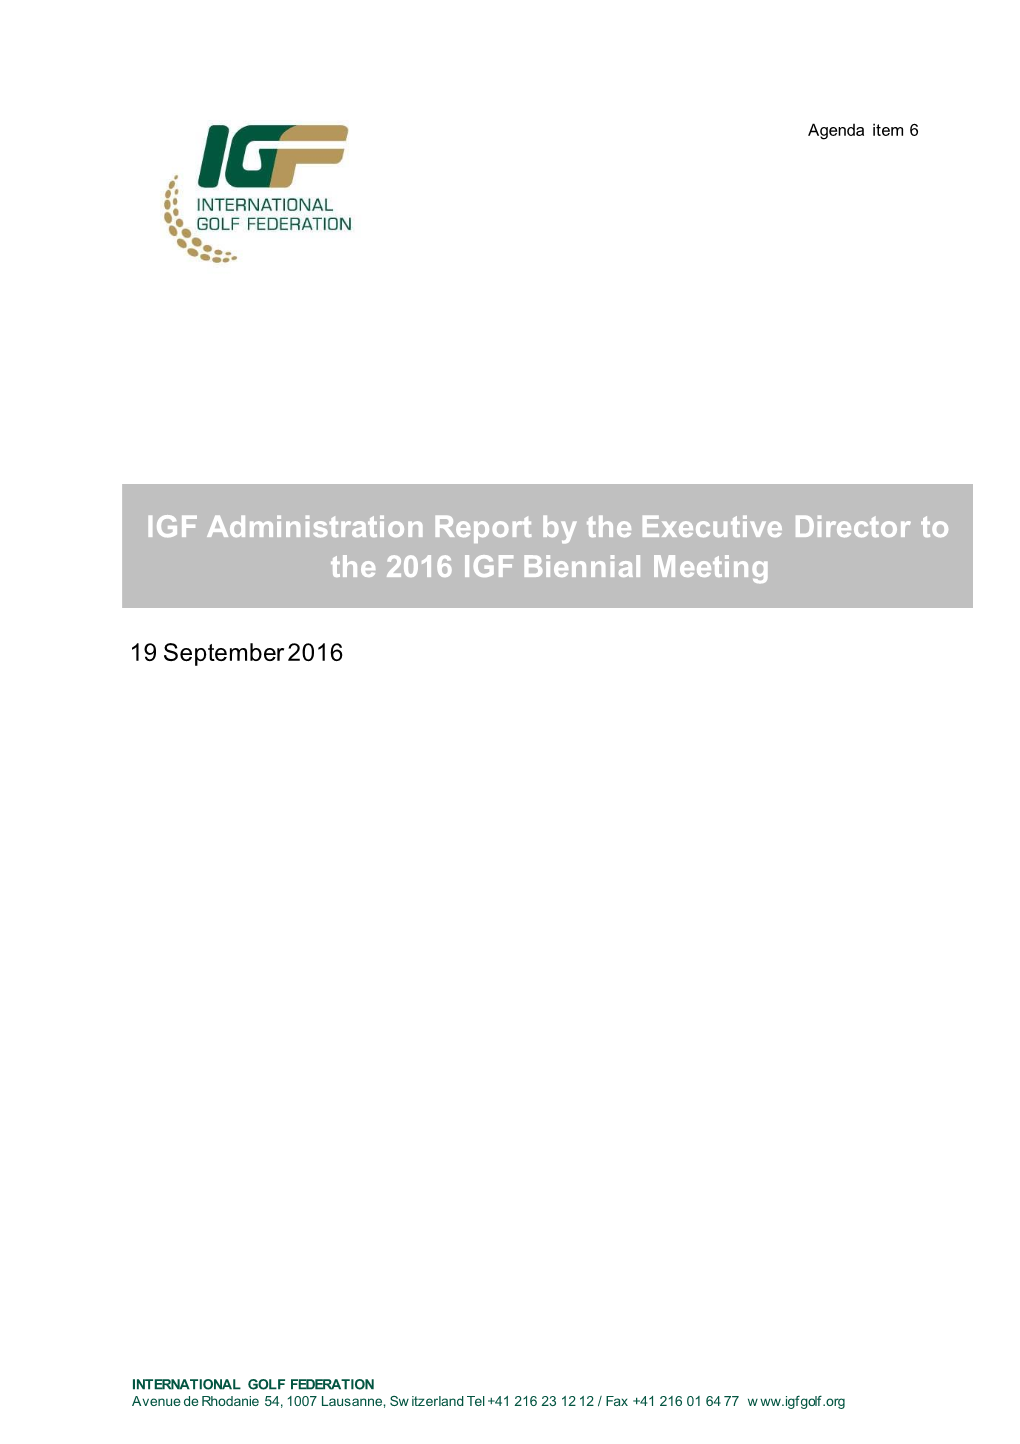 IGF Administration Report by the Executive Director to the 2016 IGF Biennial Meeting